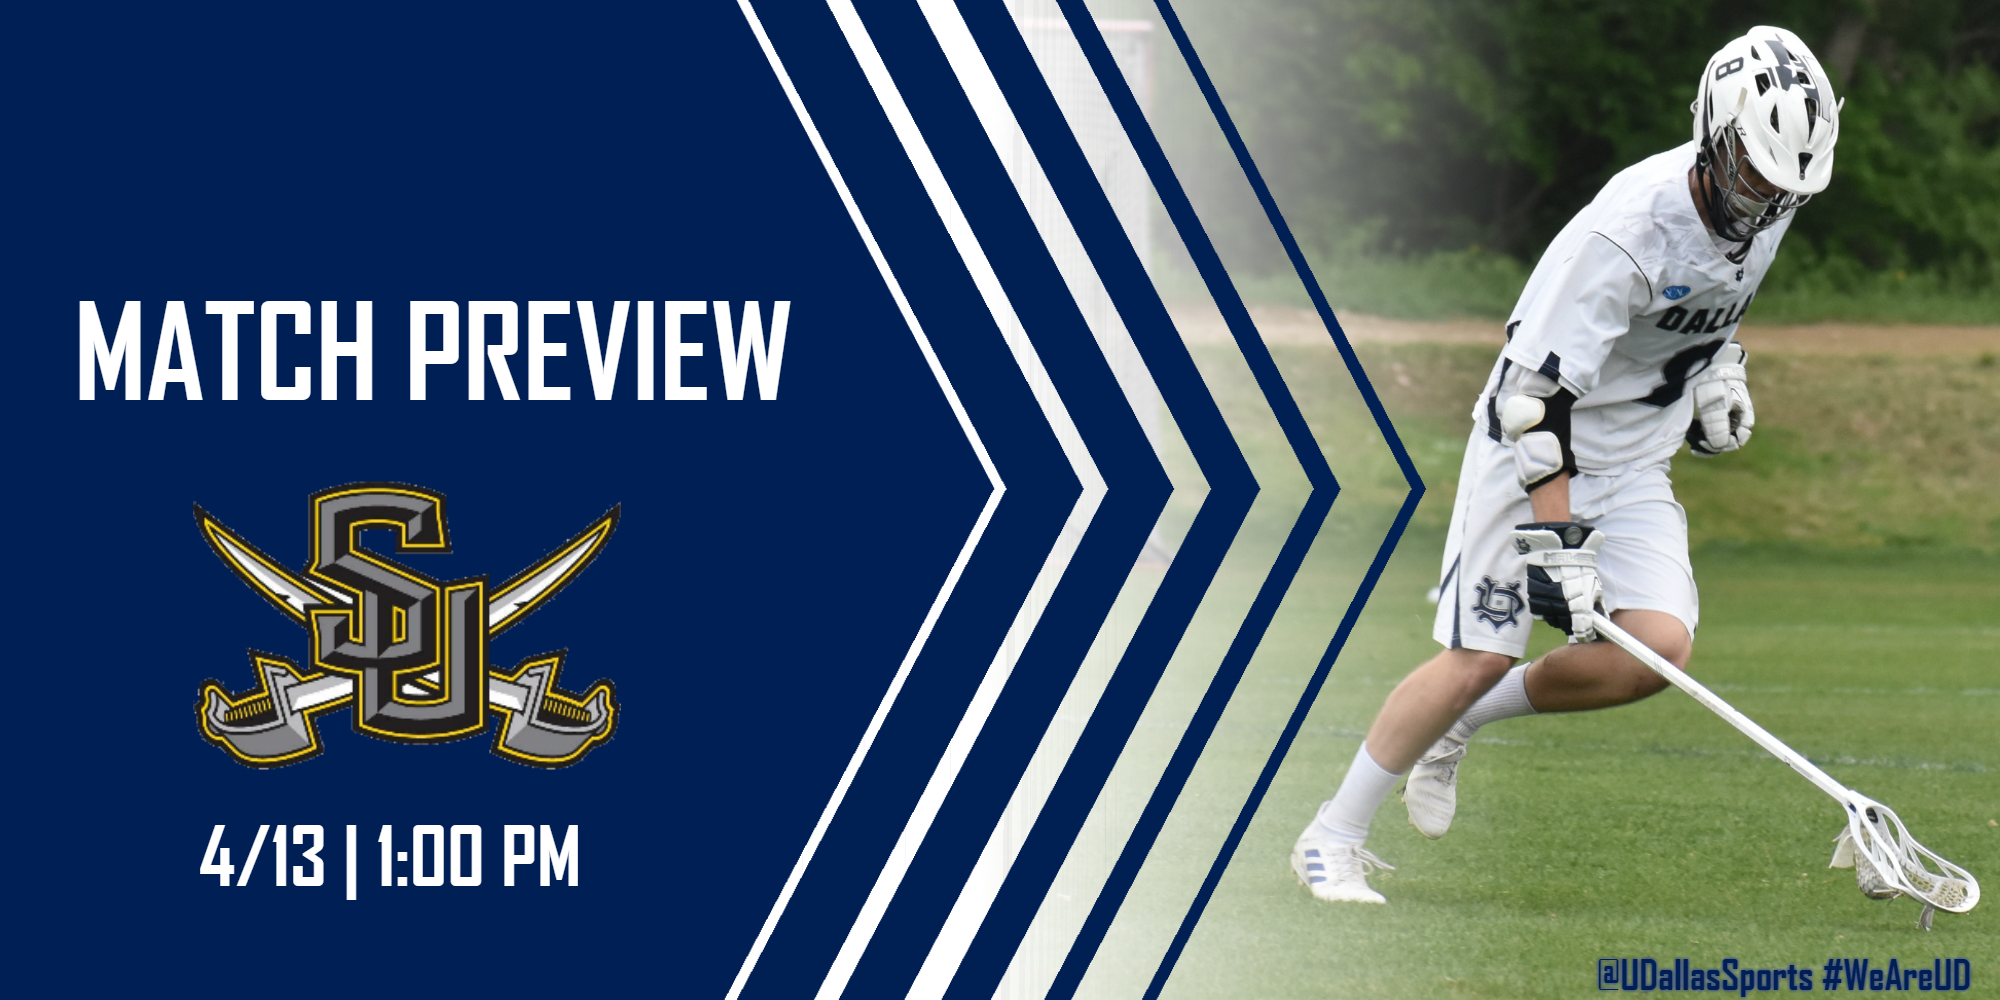 PREVIEW: Crusaders Travel to Southwestern University (4/13)